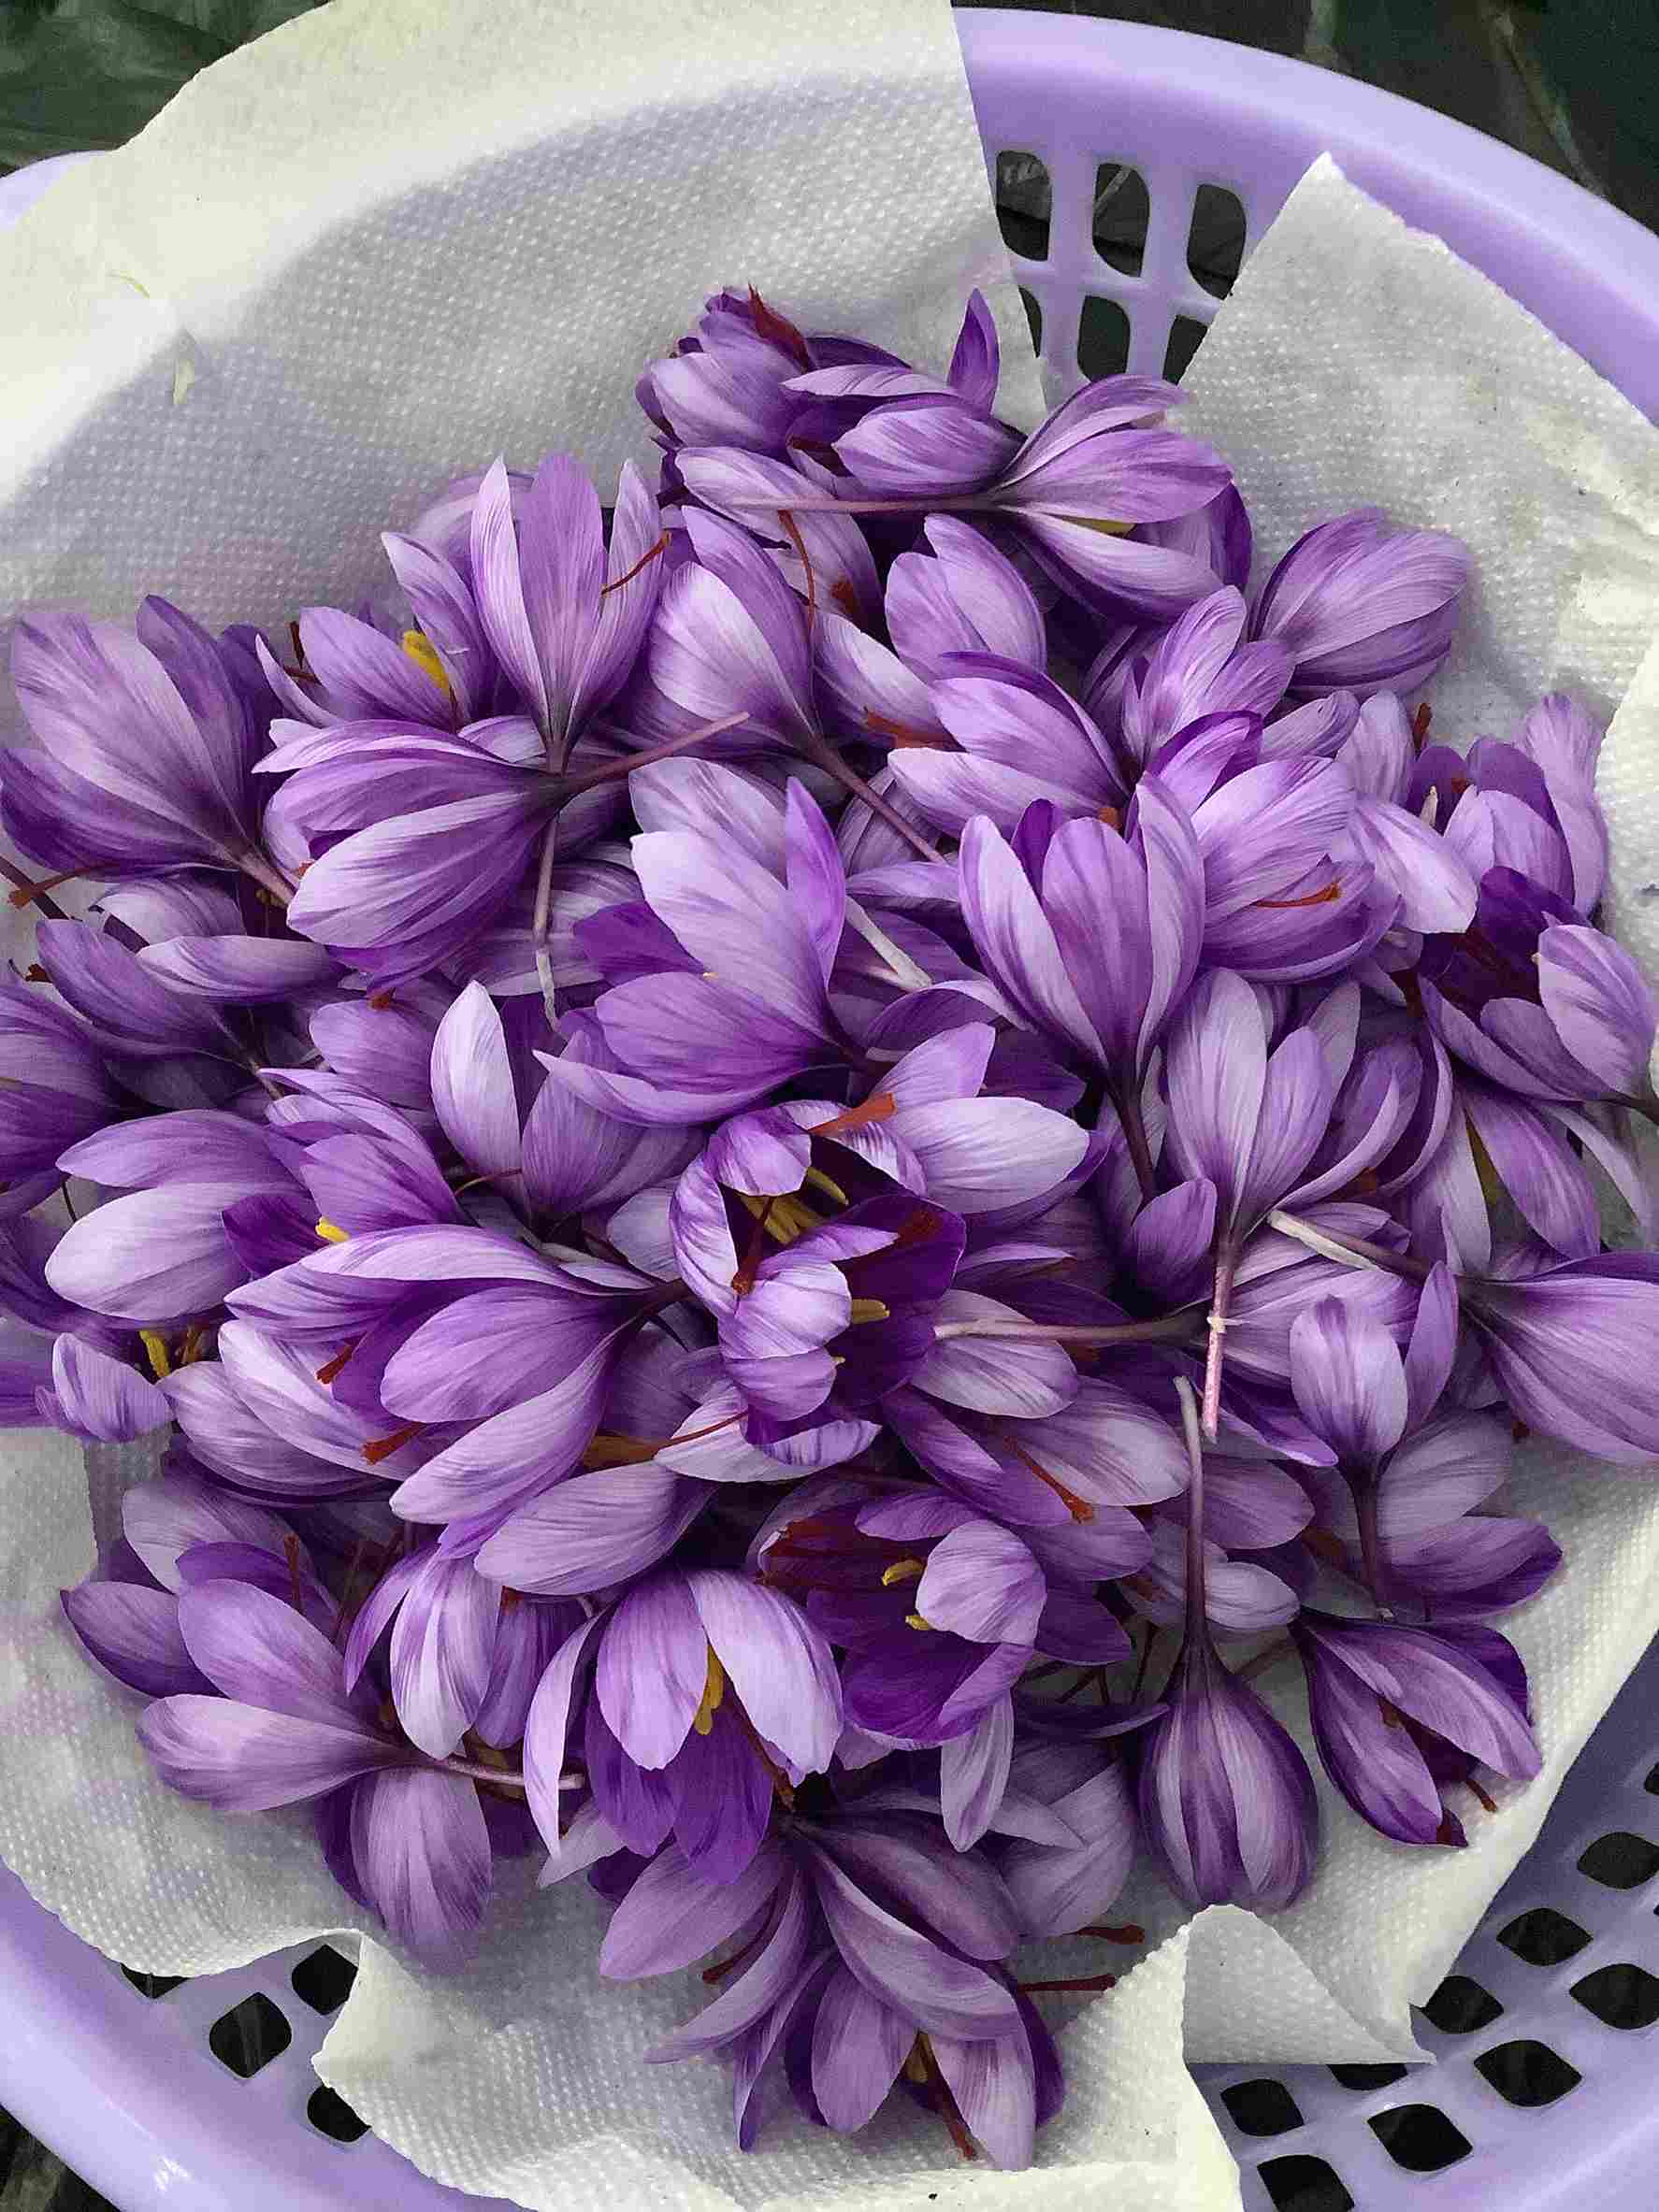 The purple petals hold within them the red threads which is the saffron that we use in cooking